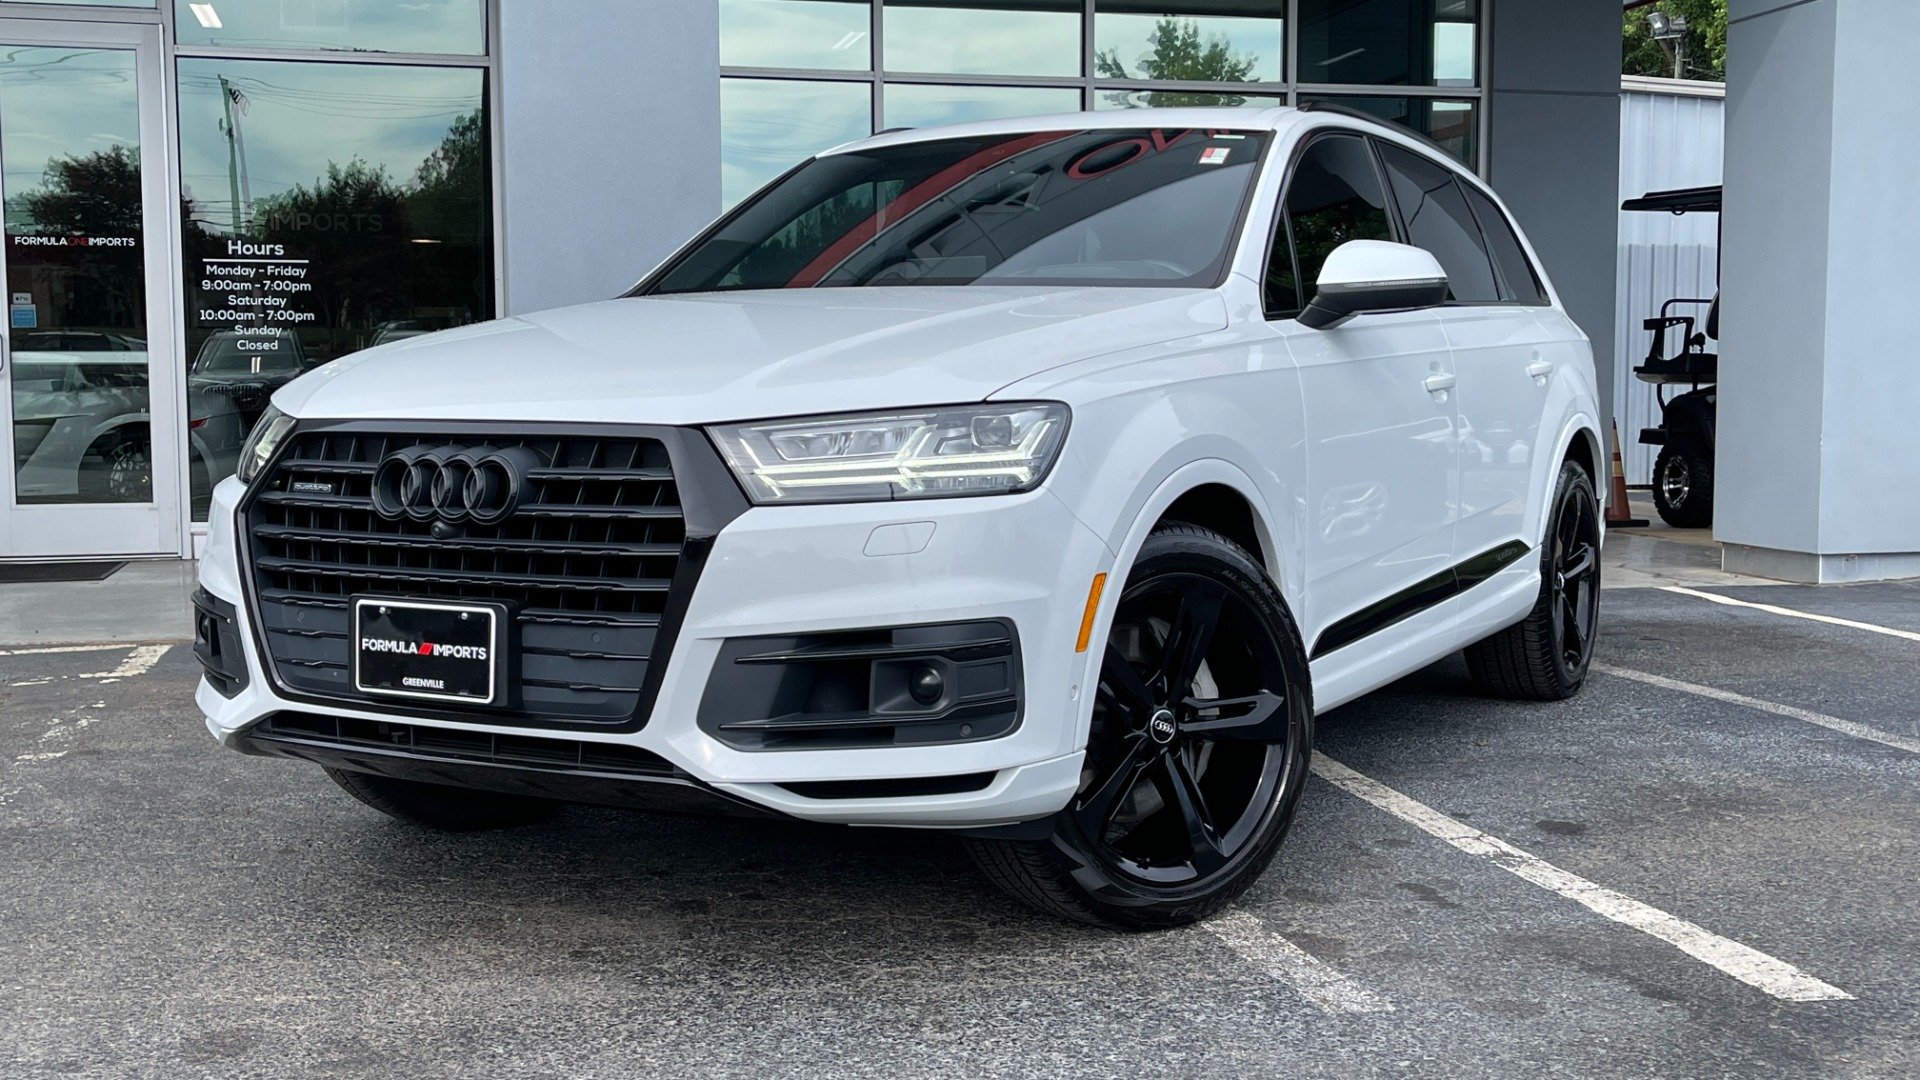 Used 2019 Audi Q7 PRESTIGE / NAV / SUNROOF / LANE ASST / TOWING / 21-IN WHLS / REA for sale $60,995 at Formula Imports in Charlotte NC 28227 74